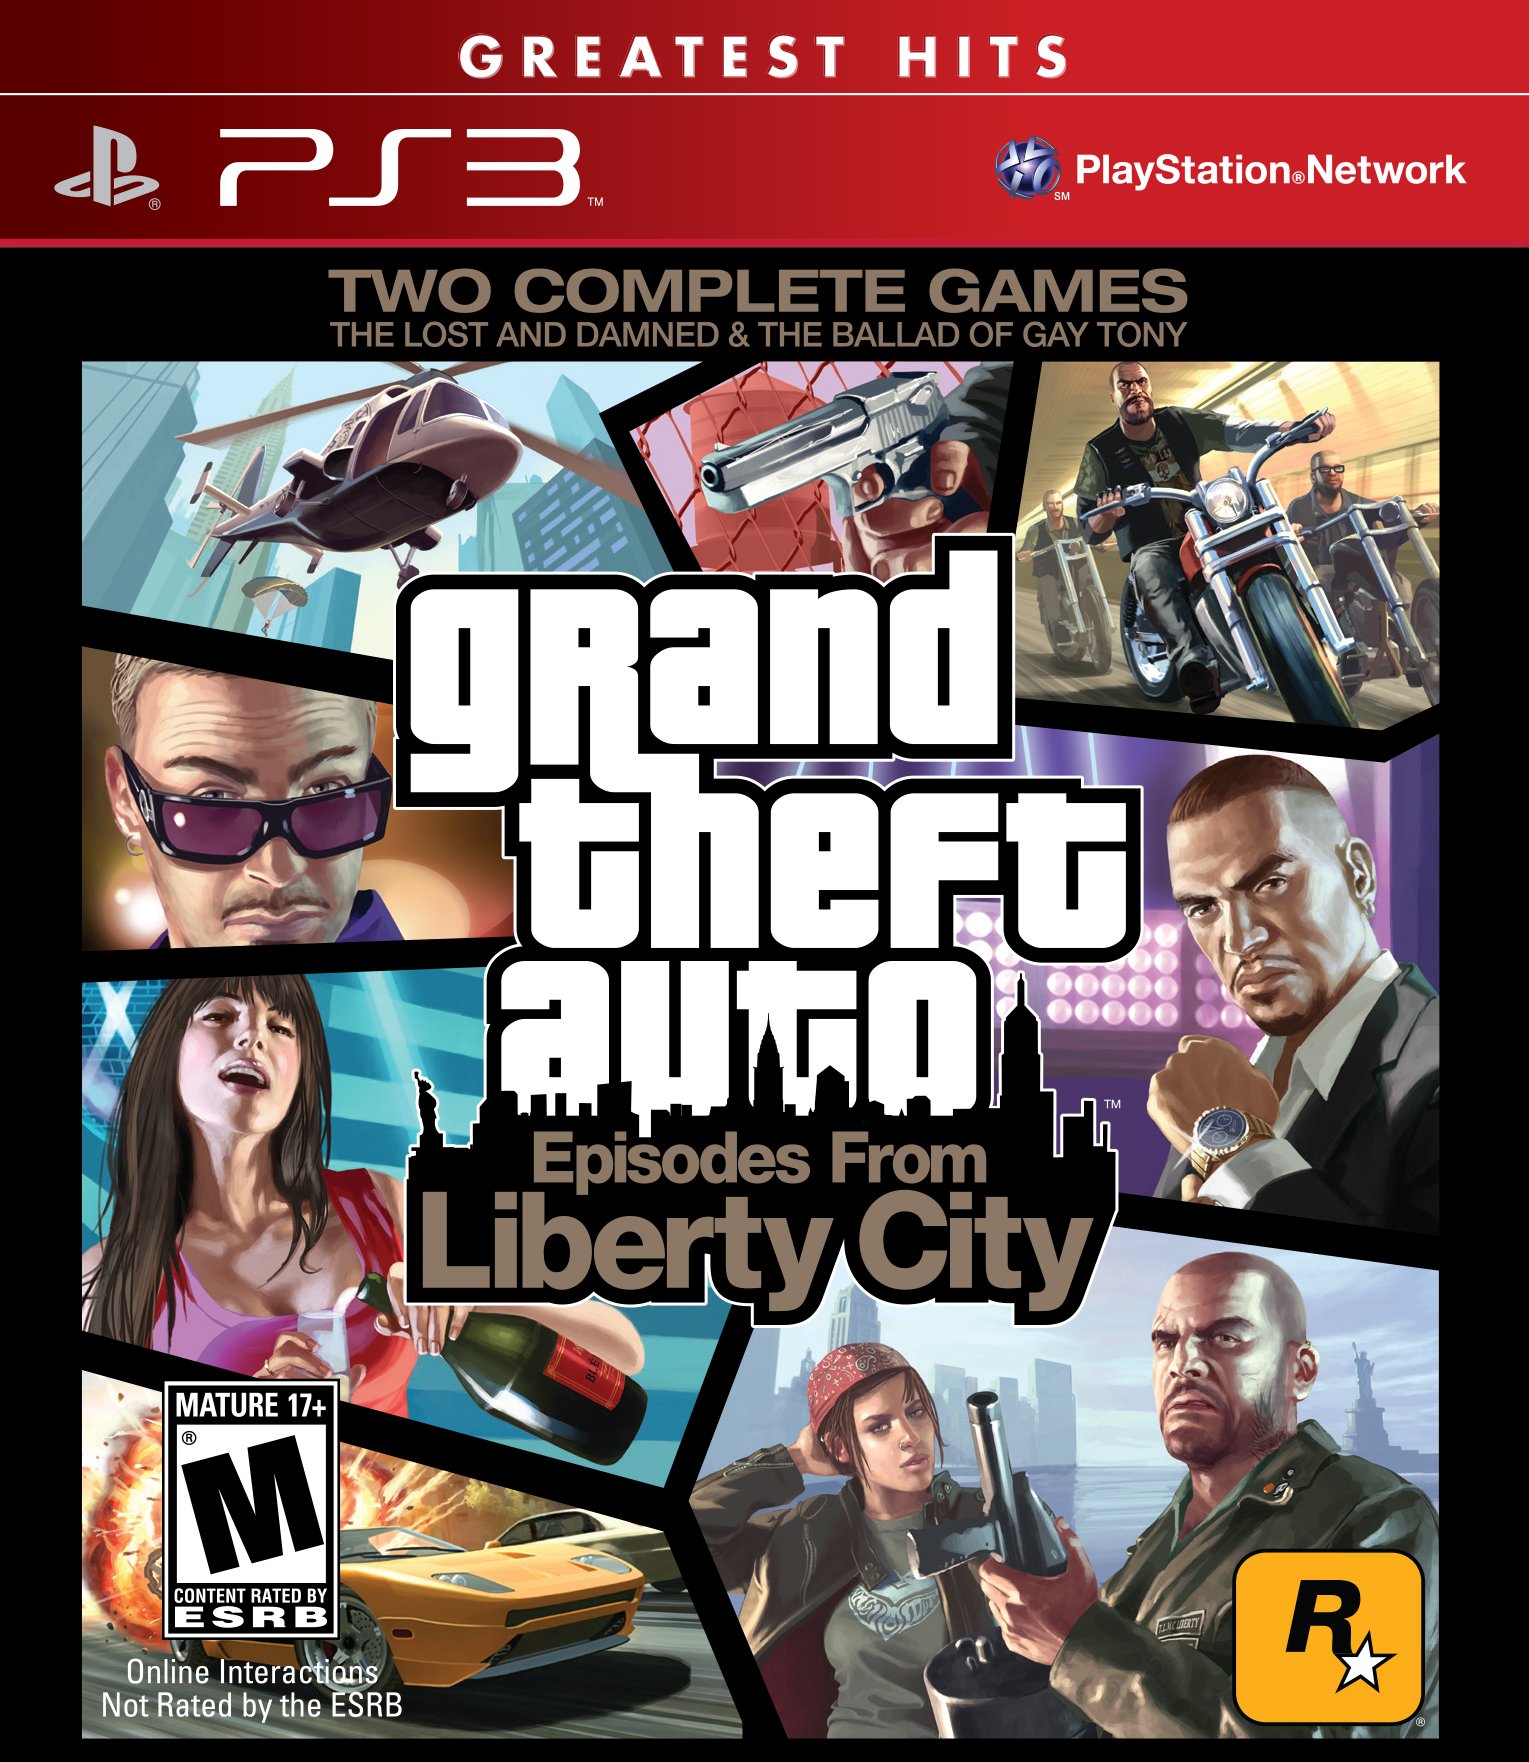 Rockstar Grand Theft Auto 4 Episodes from Liberty City (Greatest Hits)